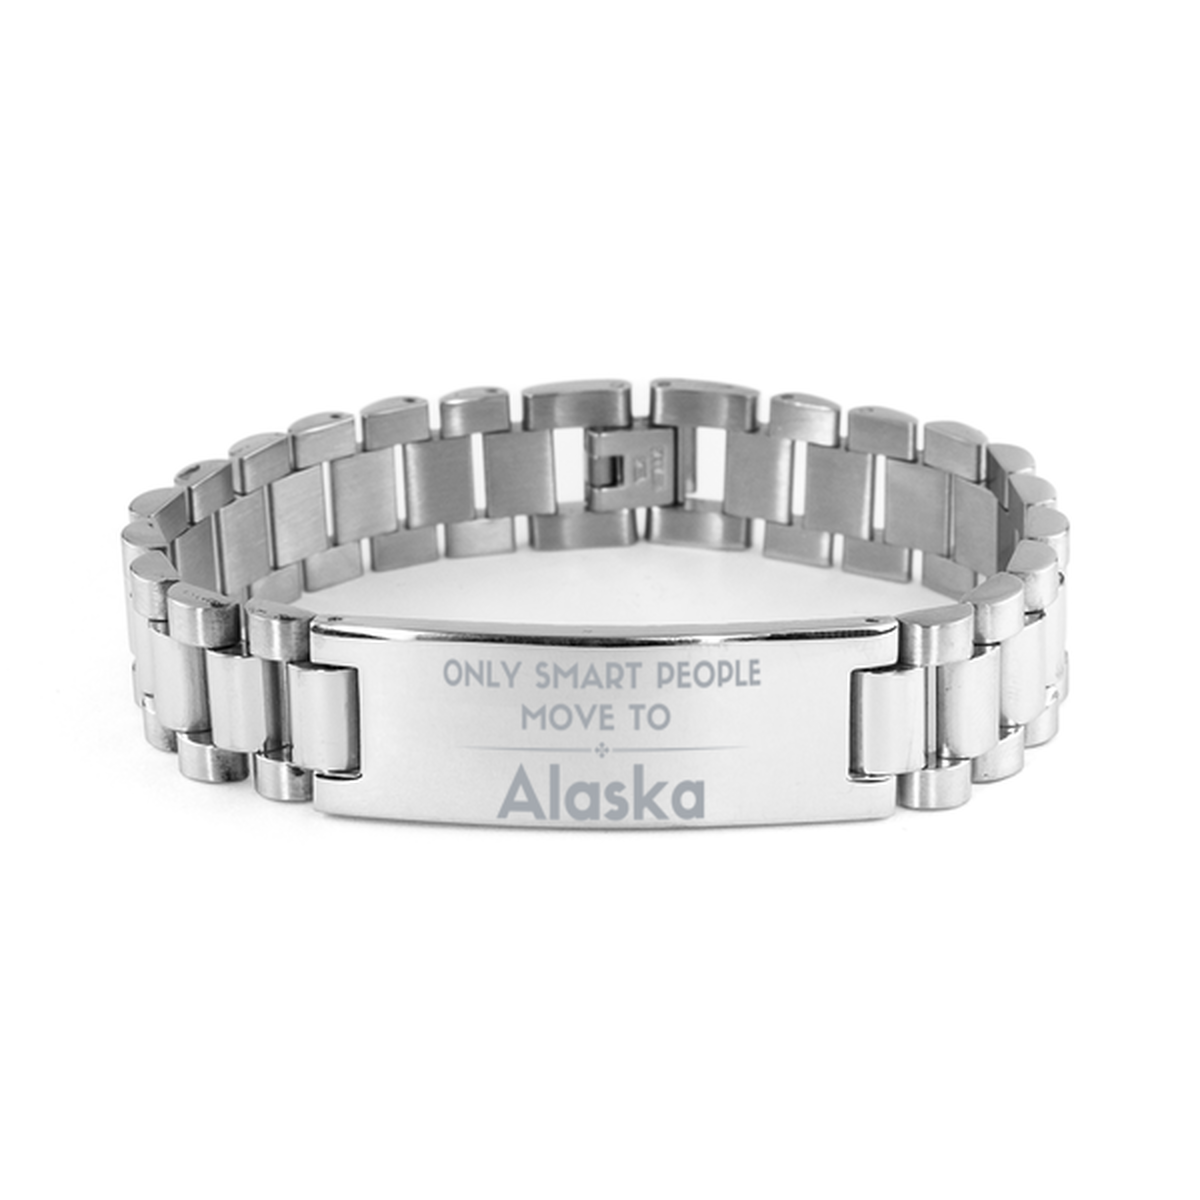 Only smart people move to Alaska Ladder Stainless Steel Bracelet, Gag Gifts For Alaska, Move to Alaska Gifts for Friends Coworker Funny Saying Quote